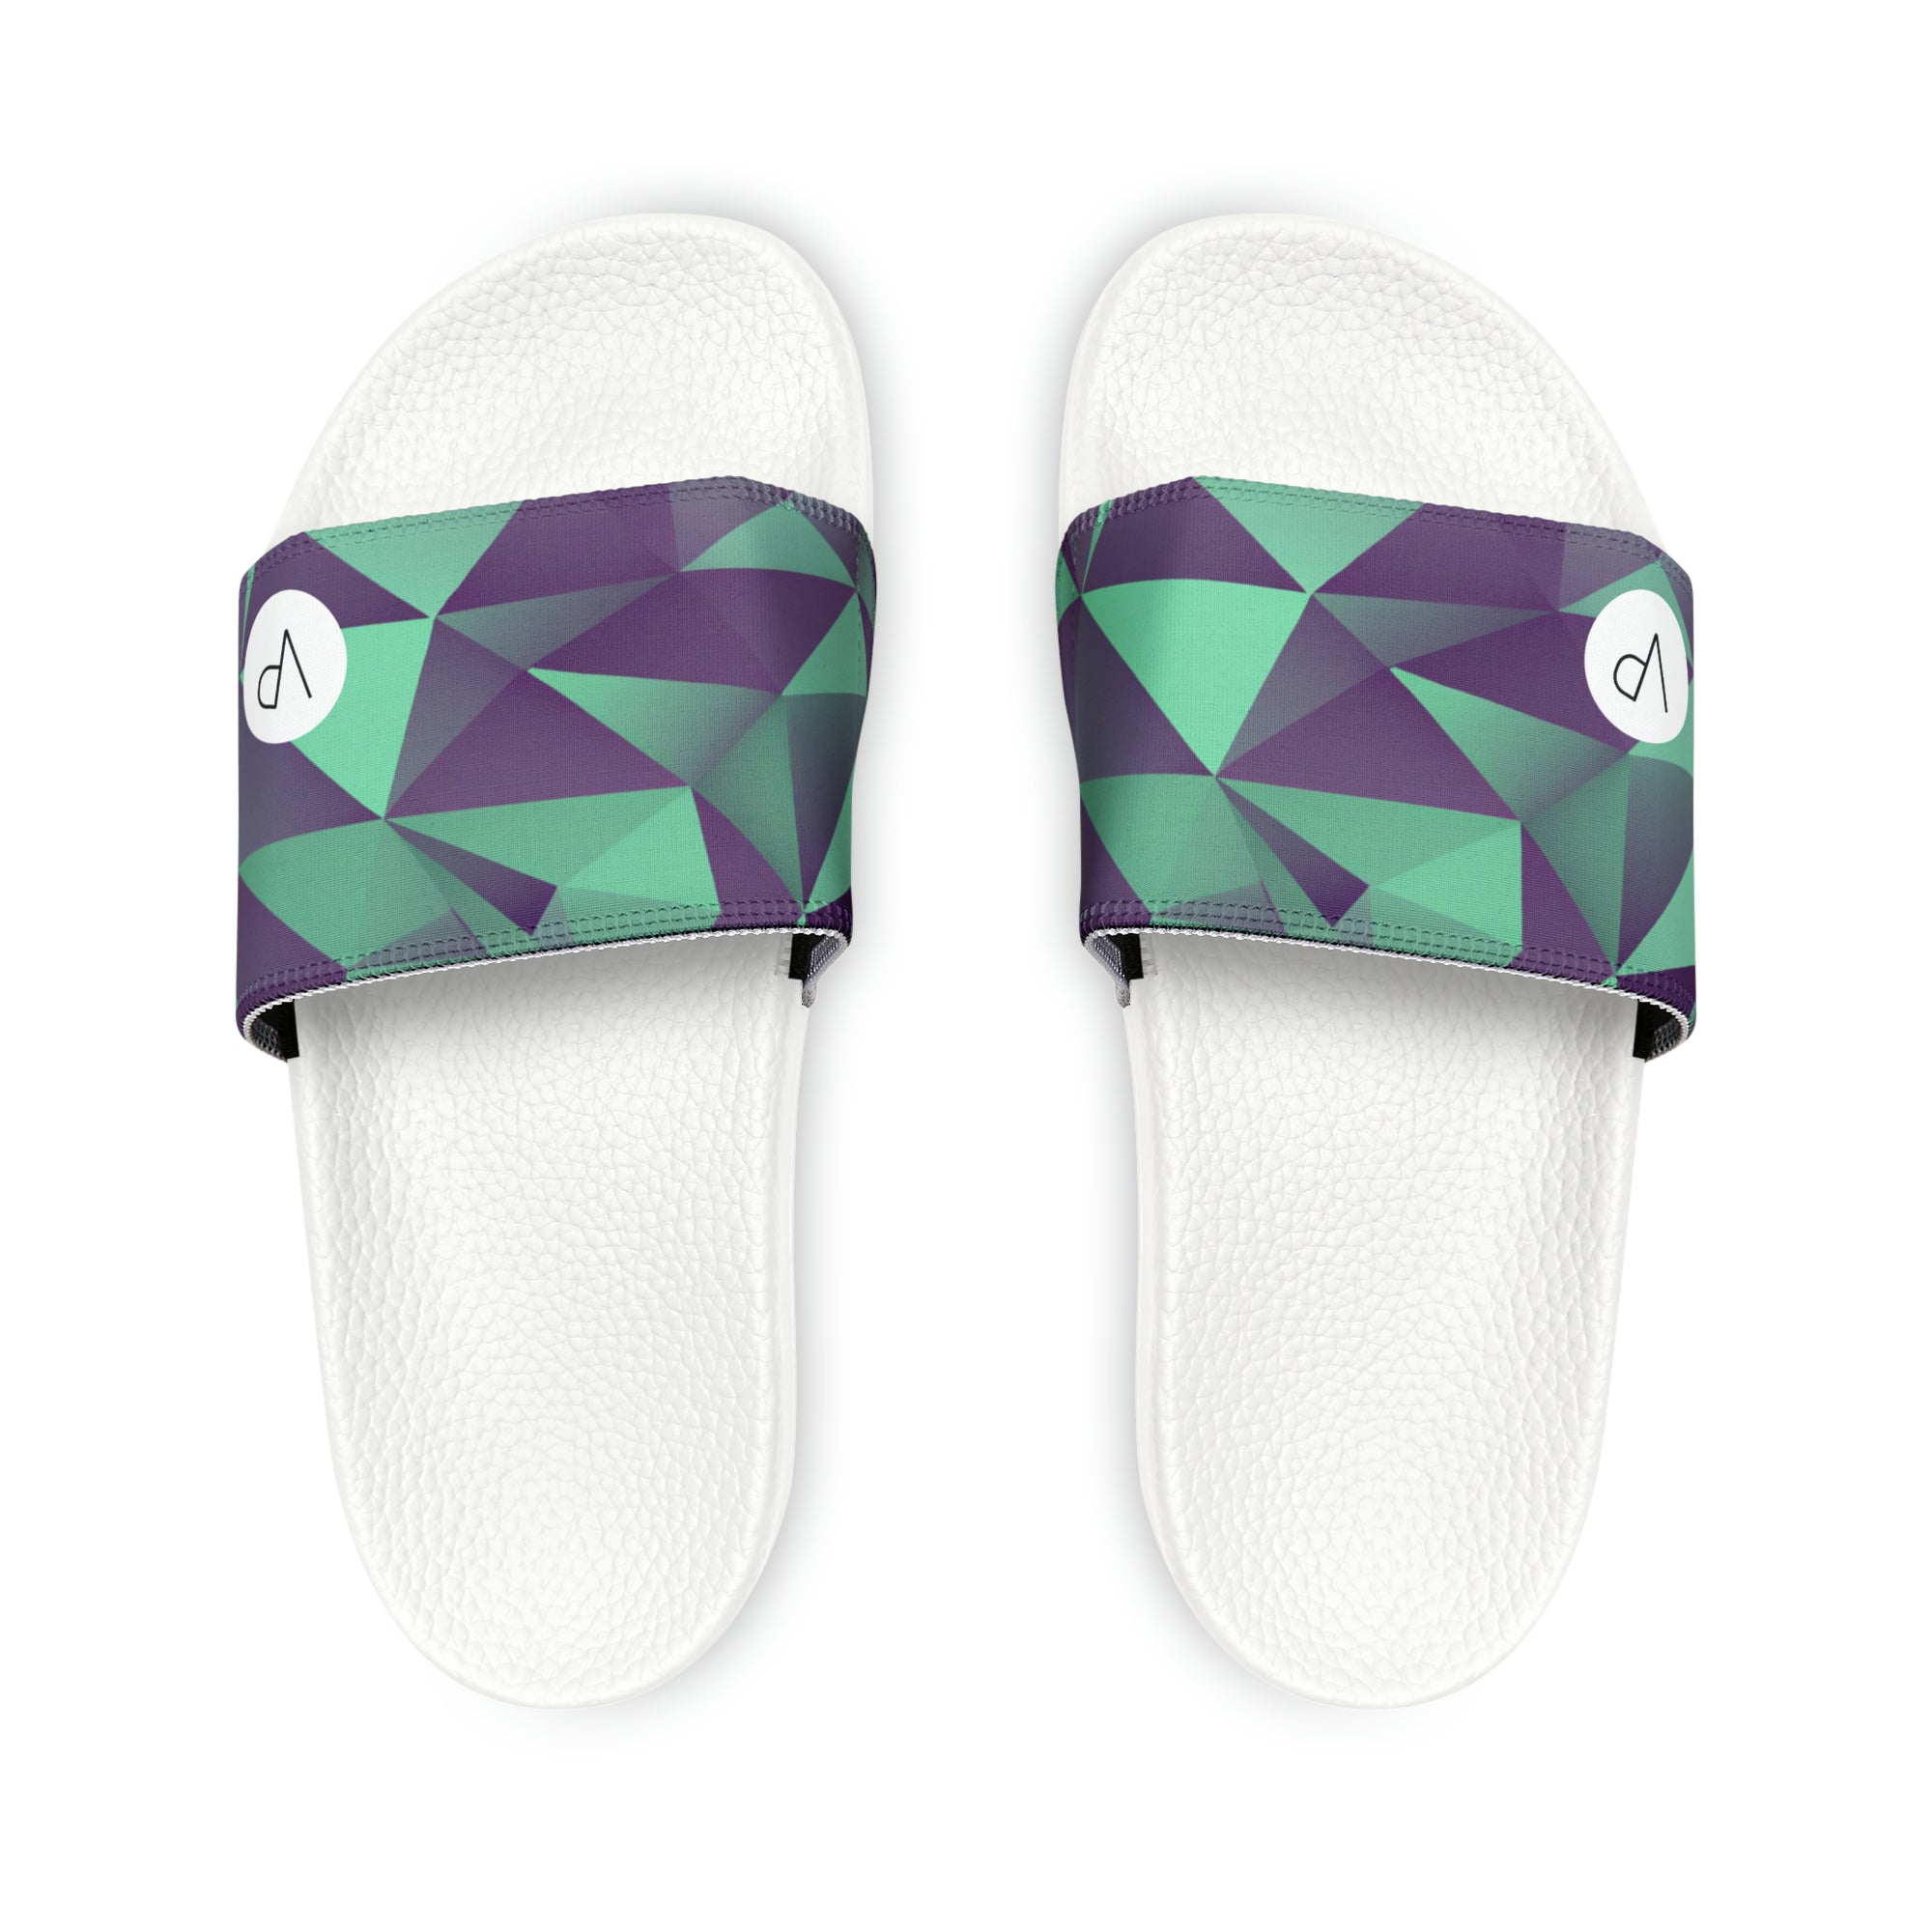 "Live Well" - Sandals